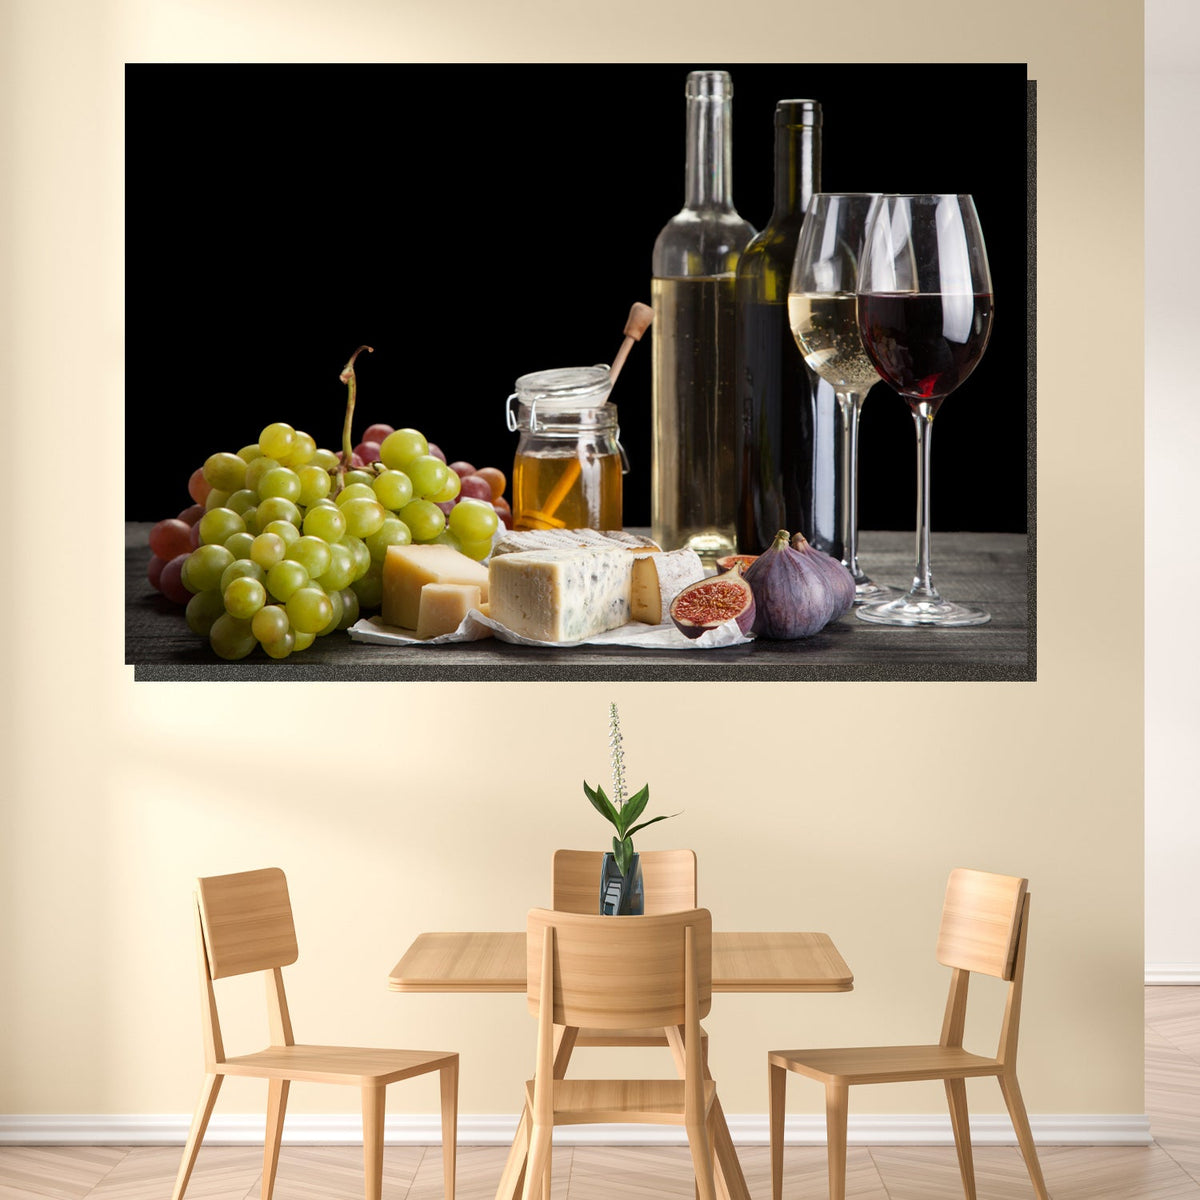 https://cdn.shopify.com/s/files/1/0387/9986/8044/products/GrapesWineandCheeseCanvasArtprintStretched-1.jpg